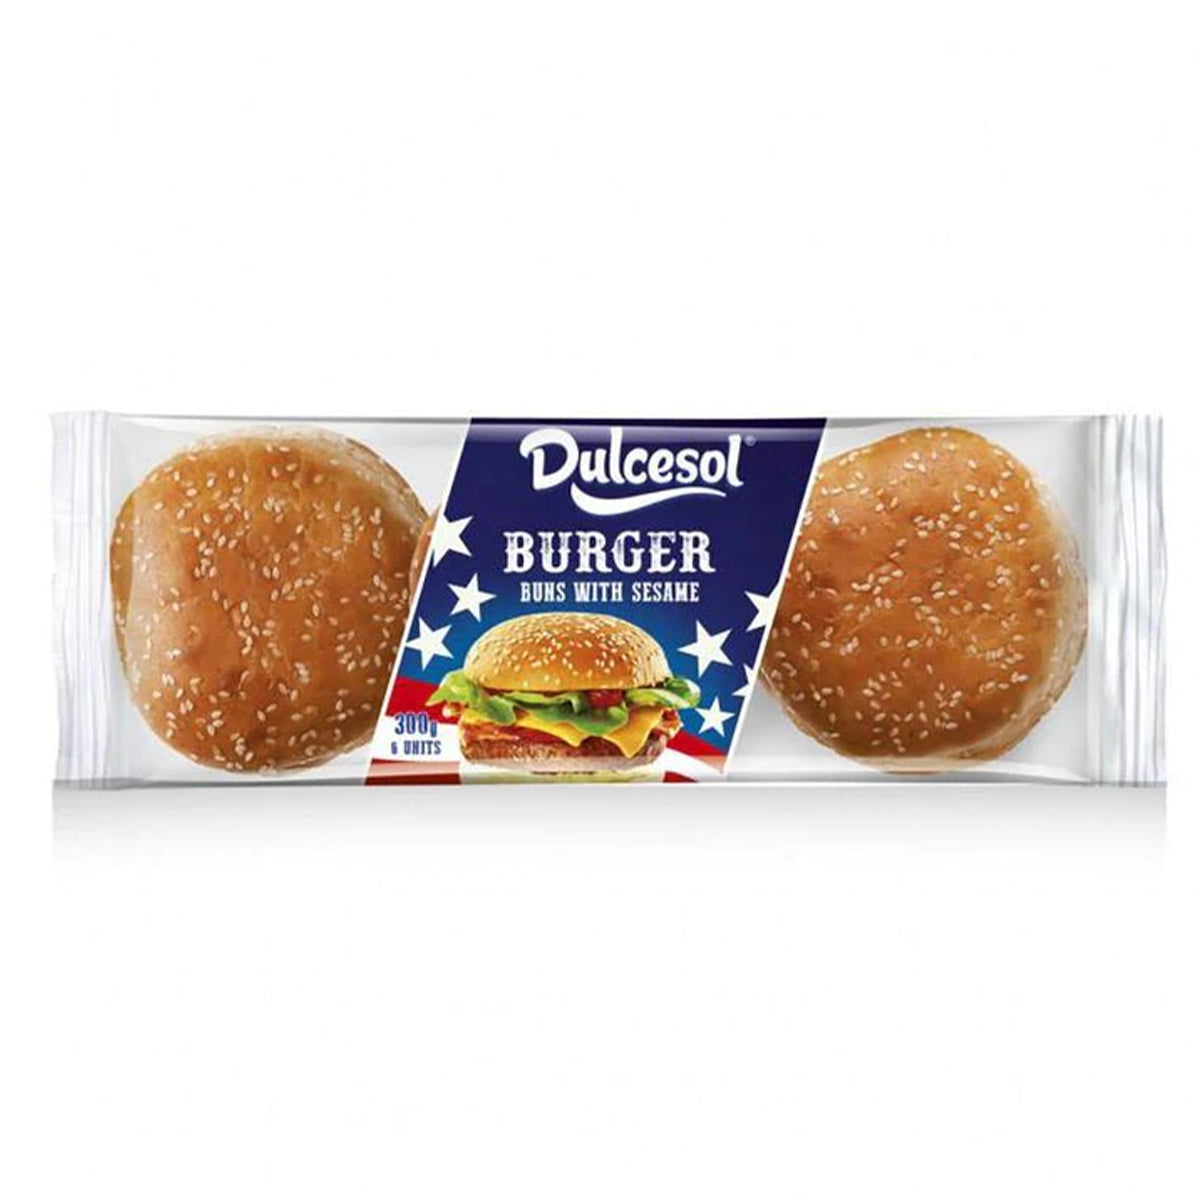 A package of Dulcesol Burger Buns With Sasame - 300g on a white background.